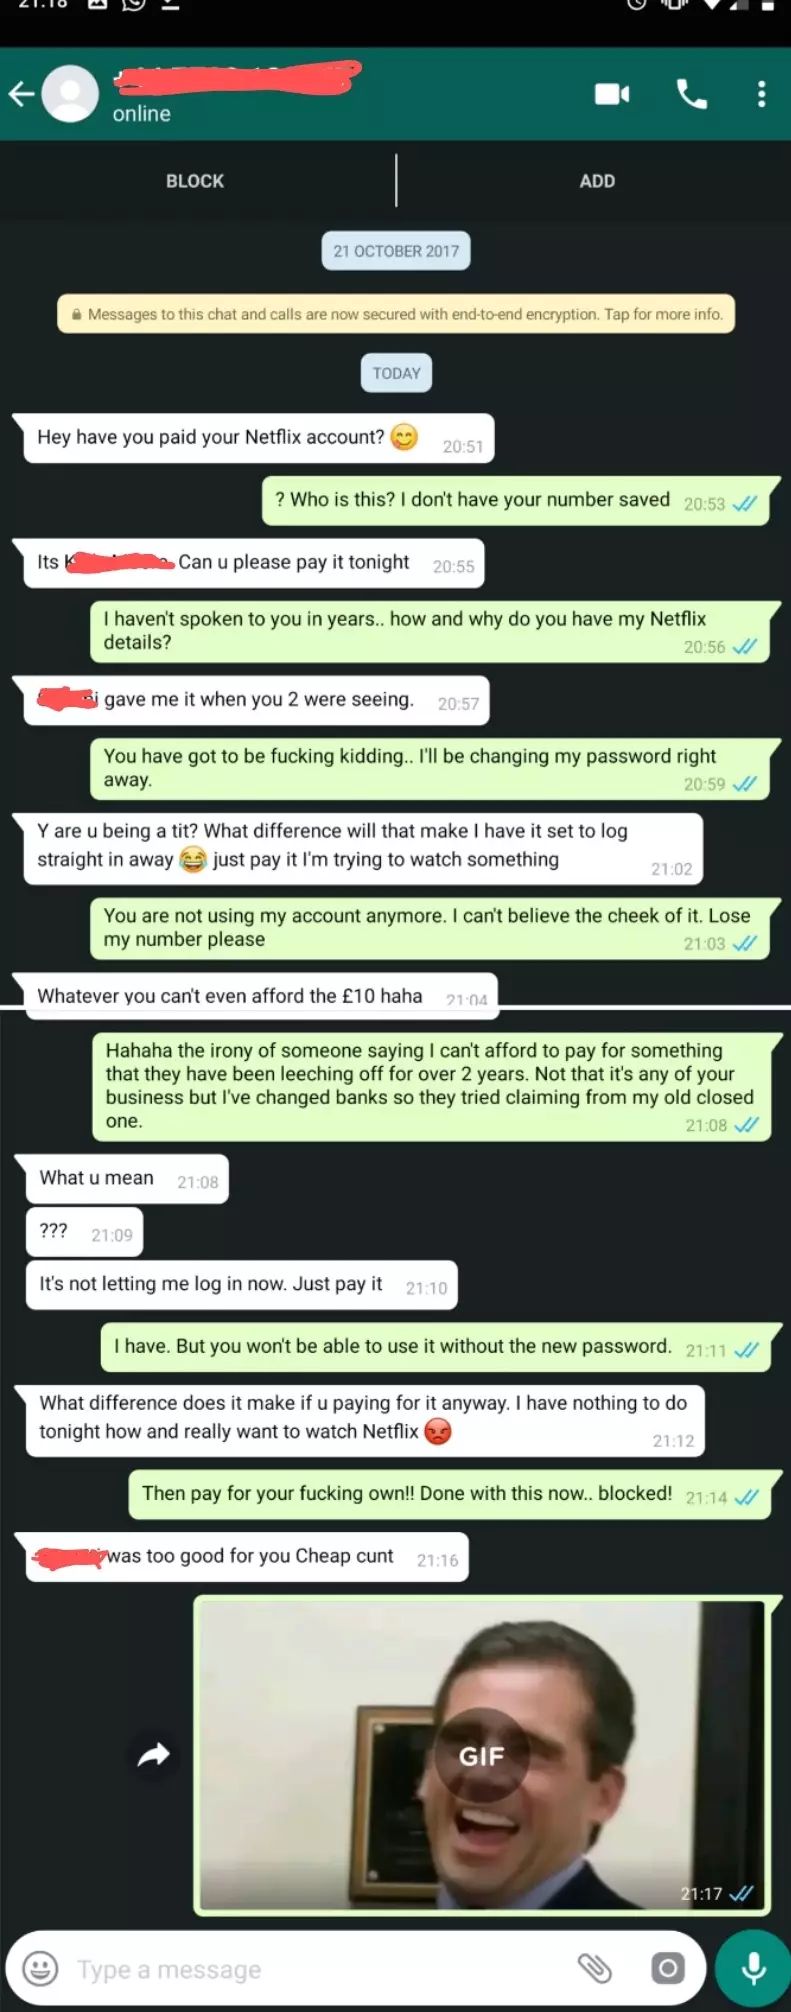 The ex didn't waste time in changing his password and locking the friend out.